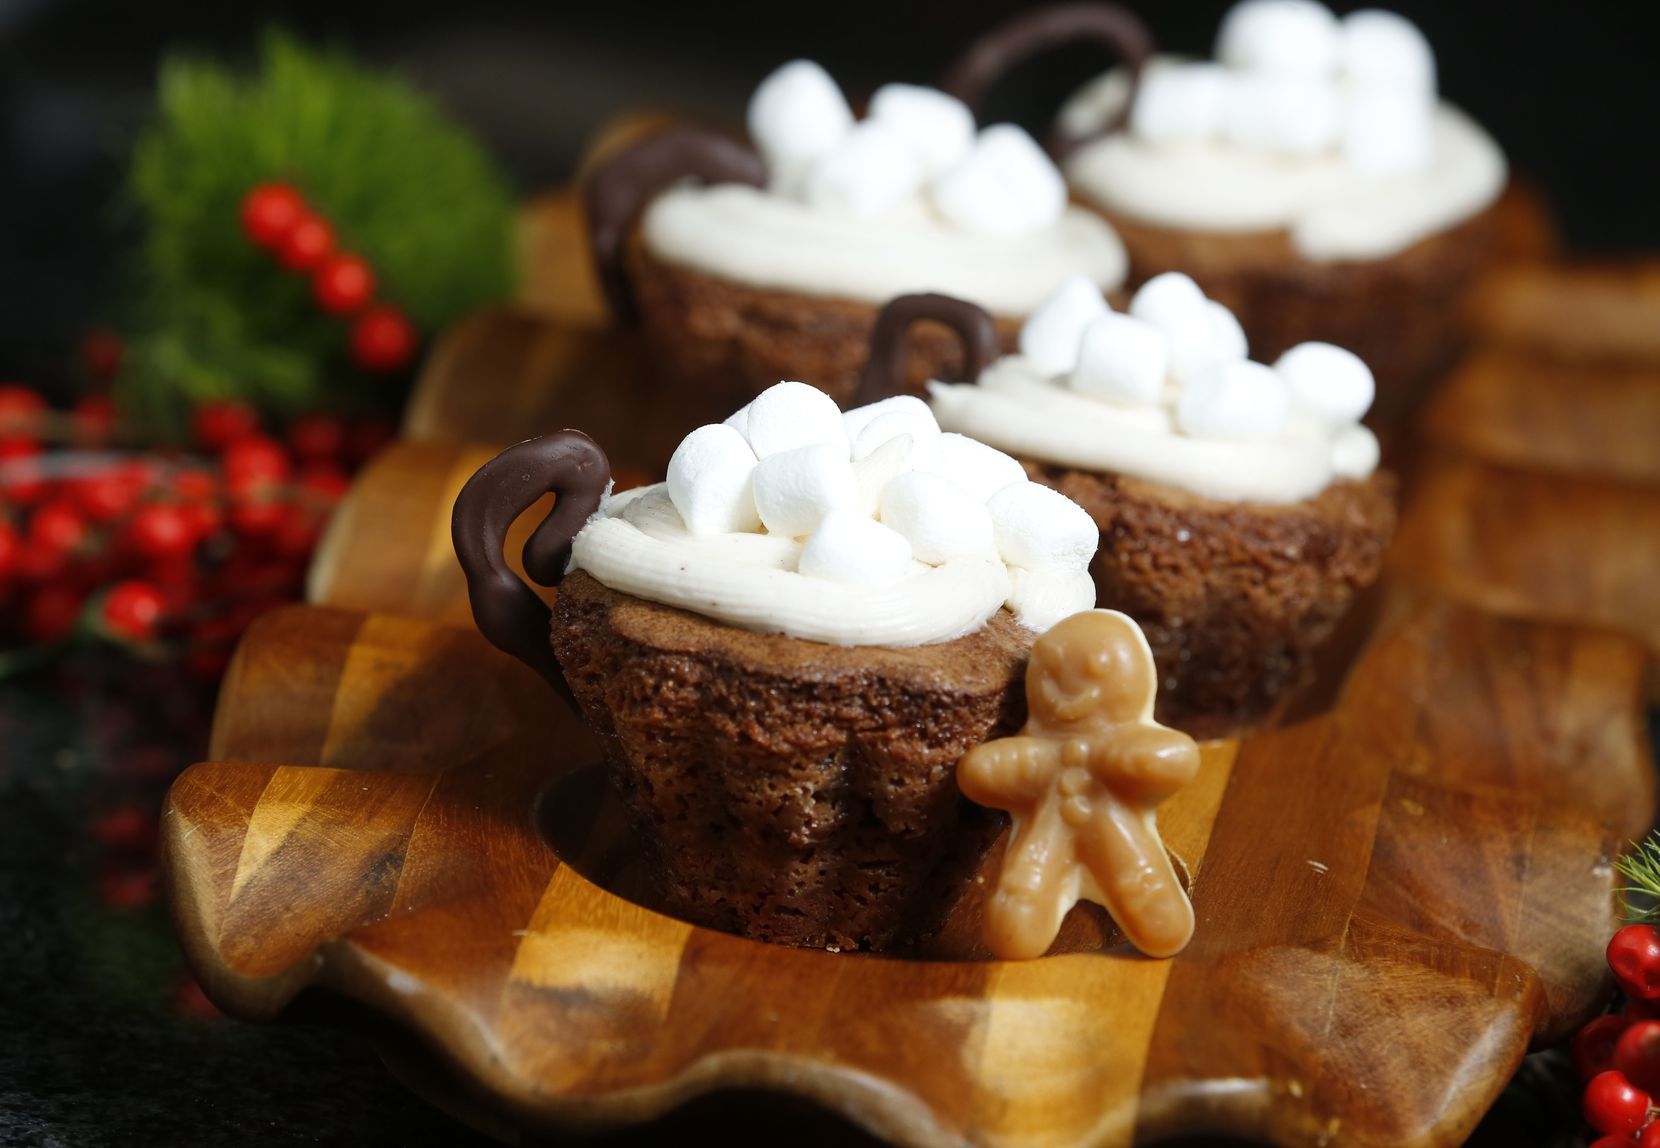 Gingerbread Hot Cocoa Cups with Spiced Marshmallow Creme by Ava Bell Reynolds won first...